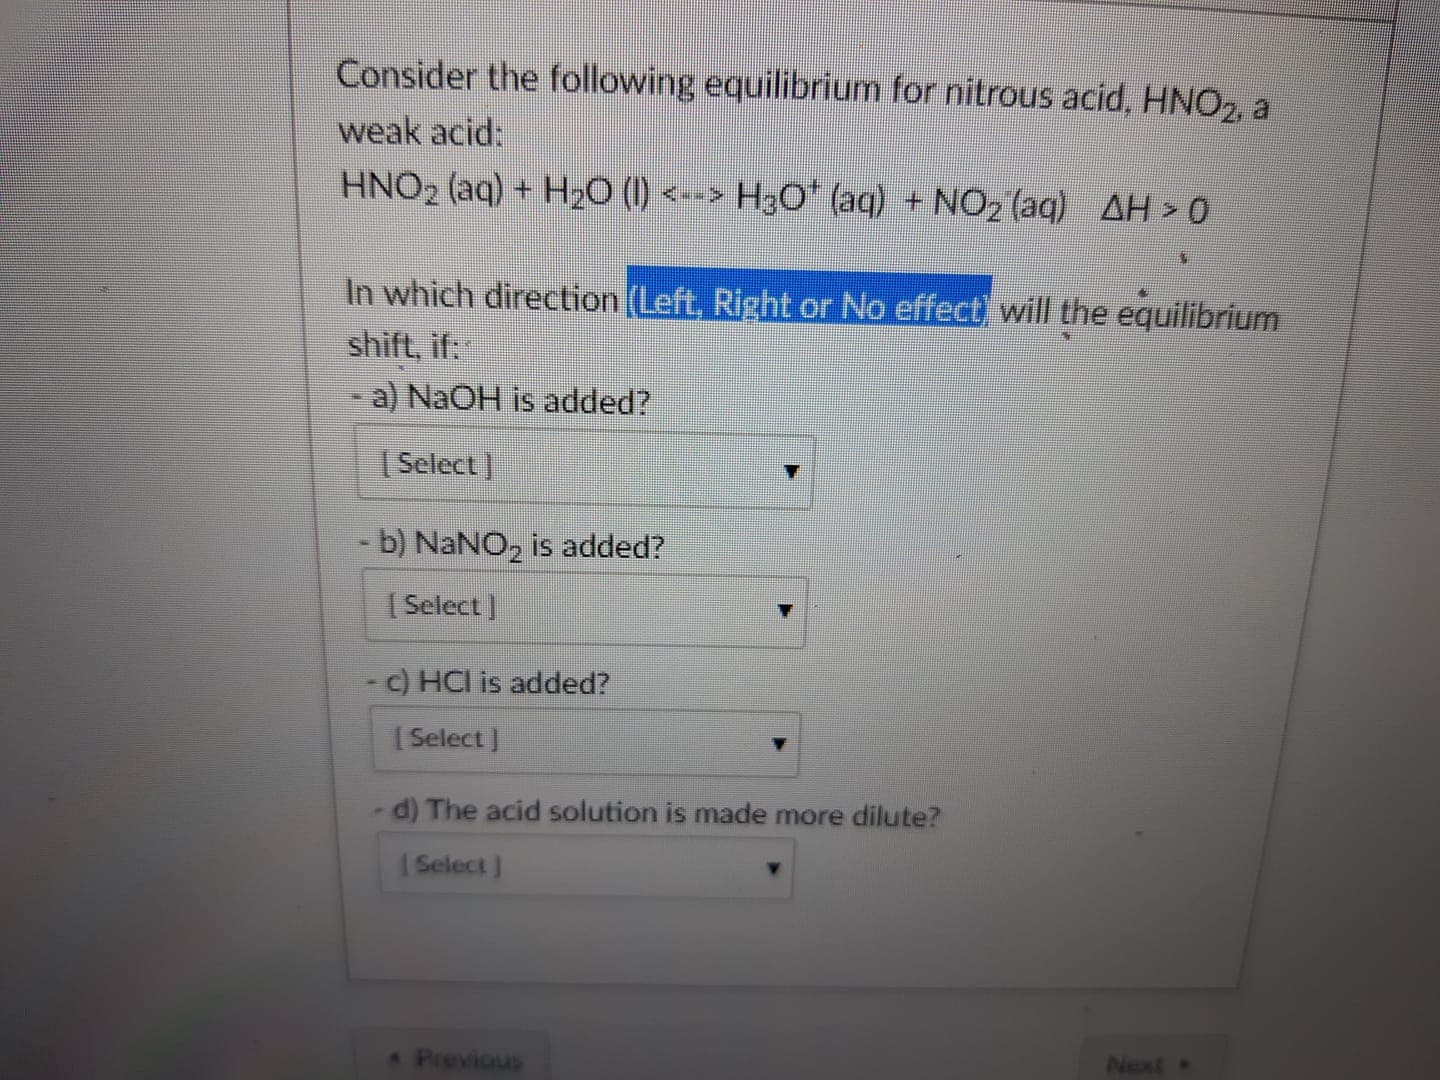 Consider the following equilibrium for nitrous acid, HNO2 a
weak acid:
HNO2 (aq) + H2O (l) <-> H30' (aq) + NO2(aq)
ΔΗ > O
麷 m
In which direction (
shift, if:
-a) NaOH is added?
Left, Right or No effect
will the equilibrium
Select l
- b) NaNO2 is added?
I Select ]
c) HCI is added?
I Select ]
d) The acid solution is made more dilute?
l Select
Next
